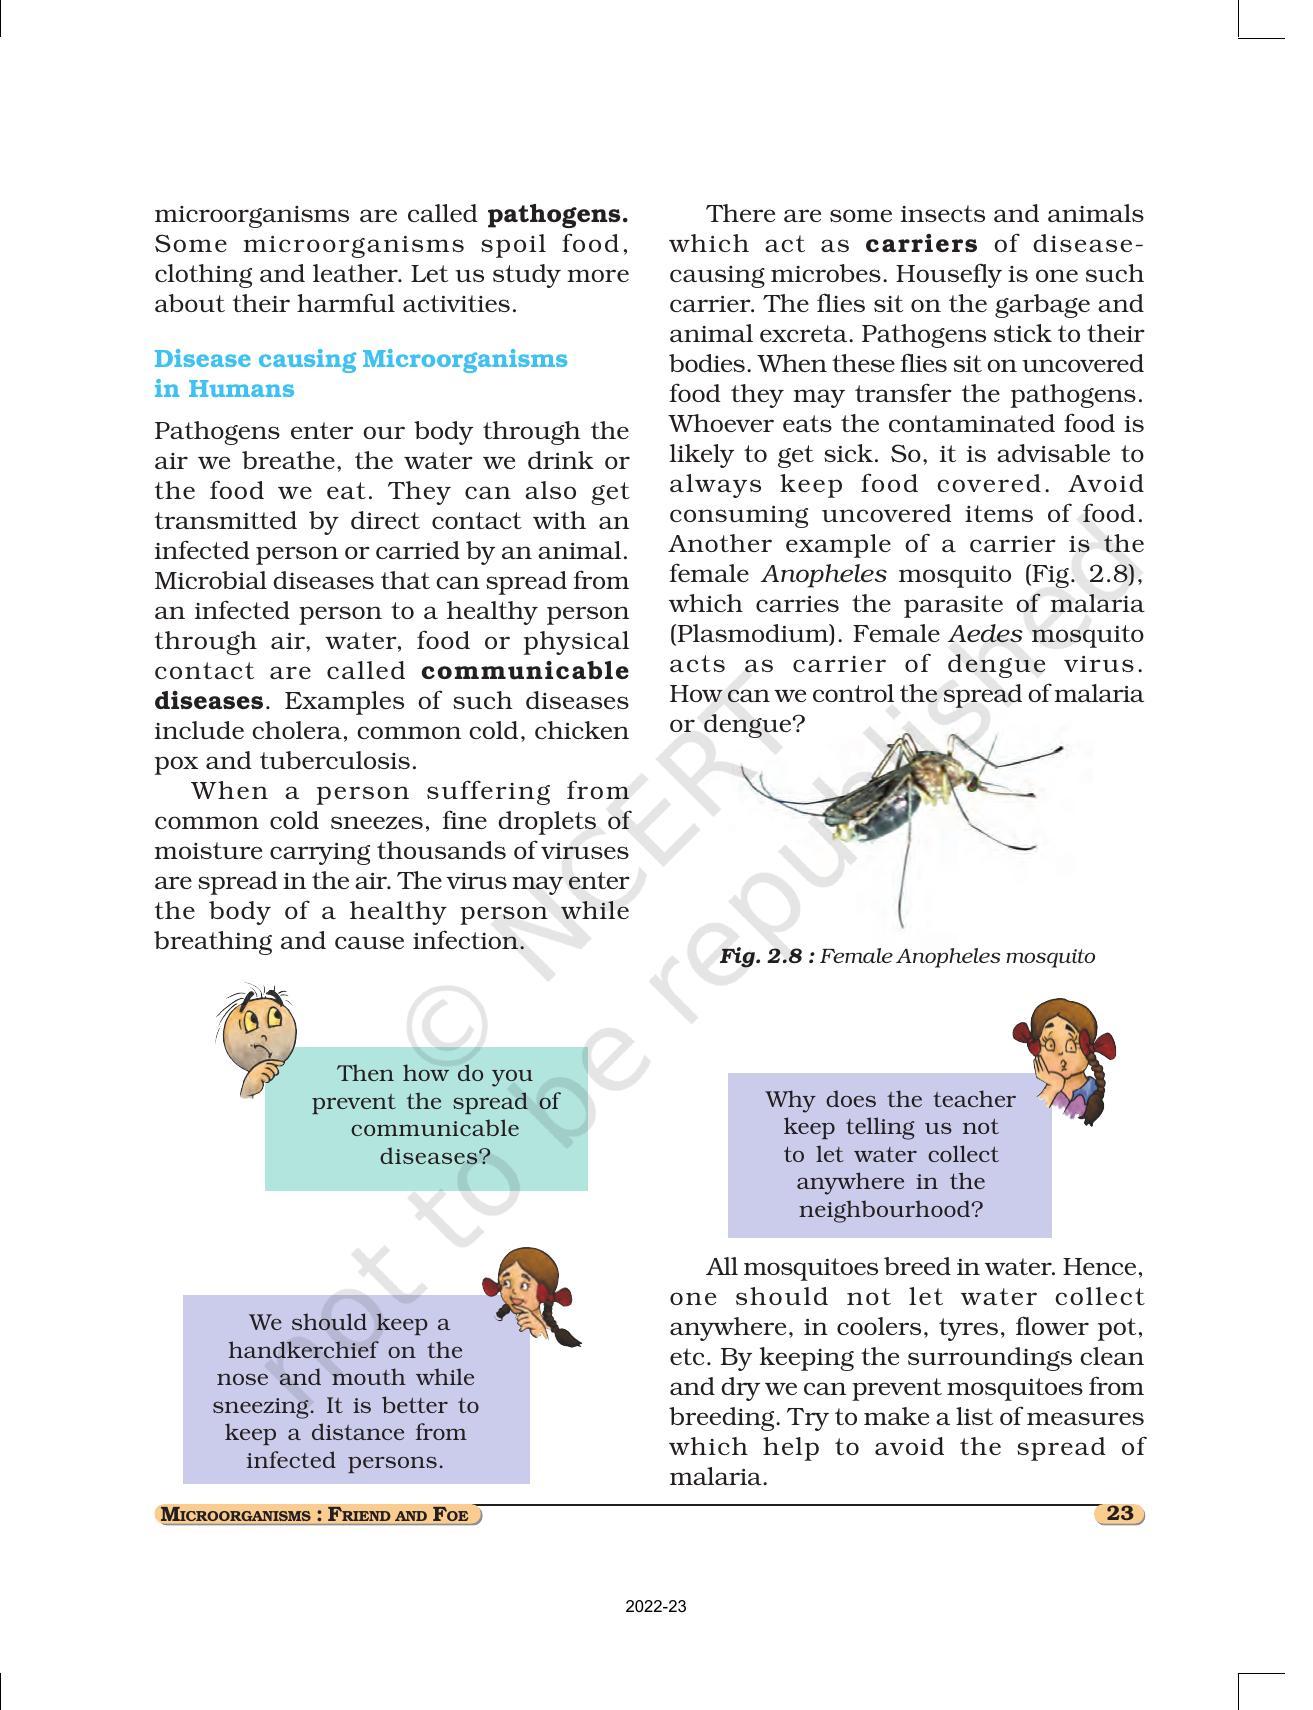 NCERT Book for Class 8 Science Chapter 2 Microorganisms: Friend and Foe - Page 7